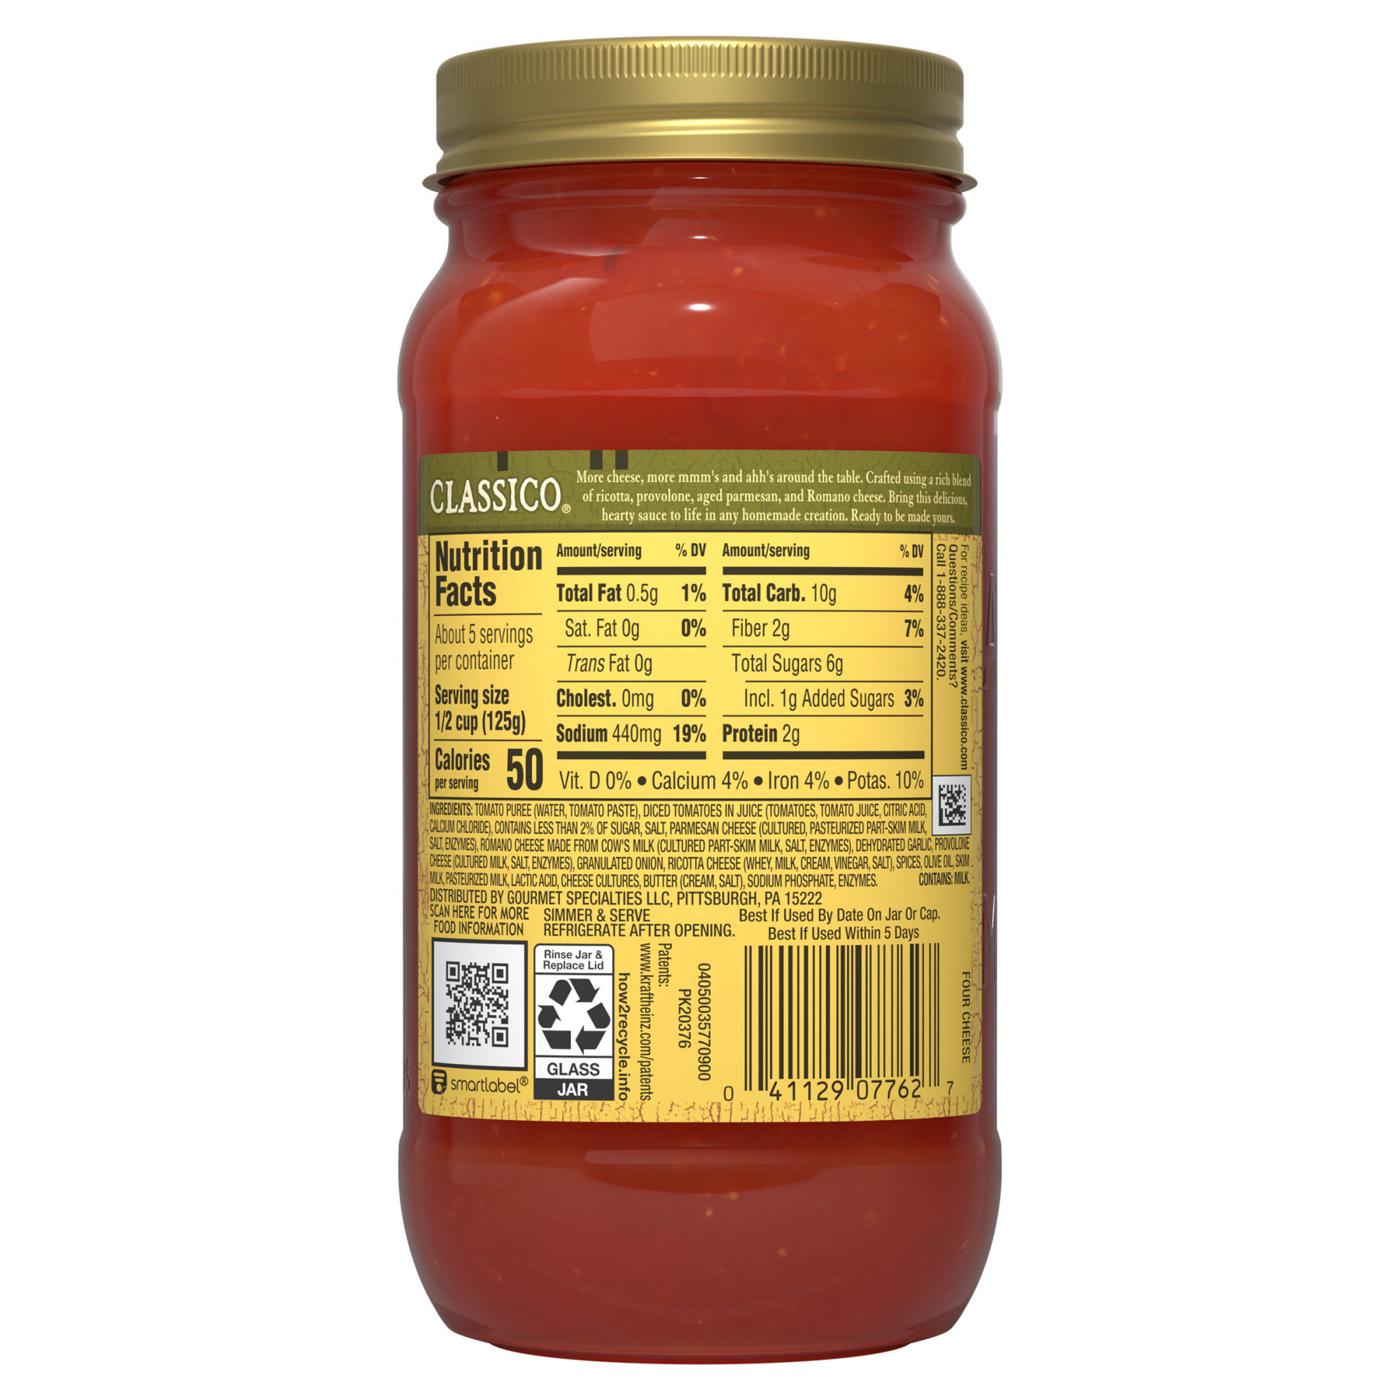 Classico Four Cheese Pasta Sauce; image 2 of 9